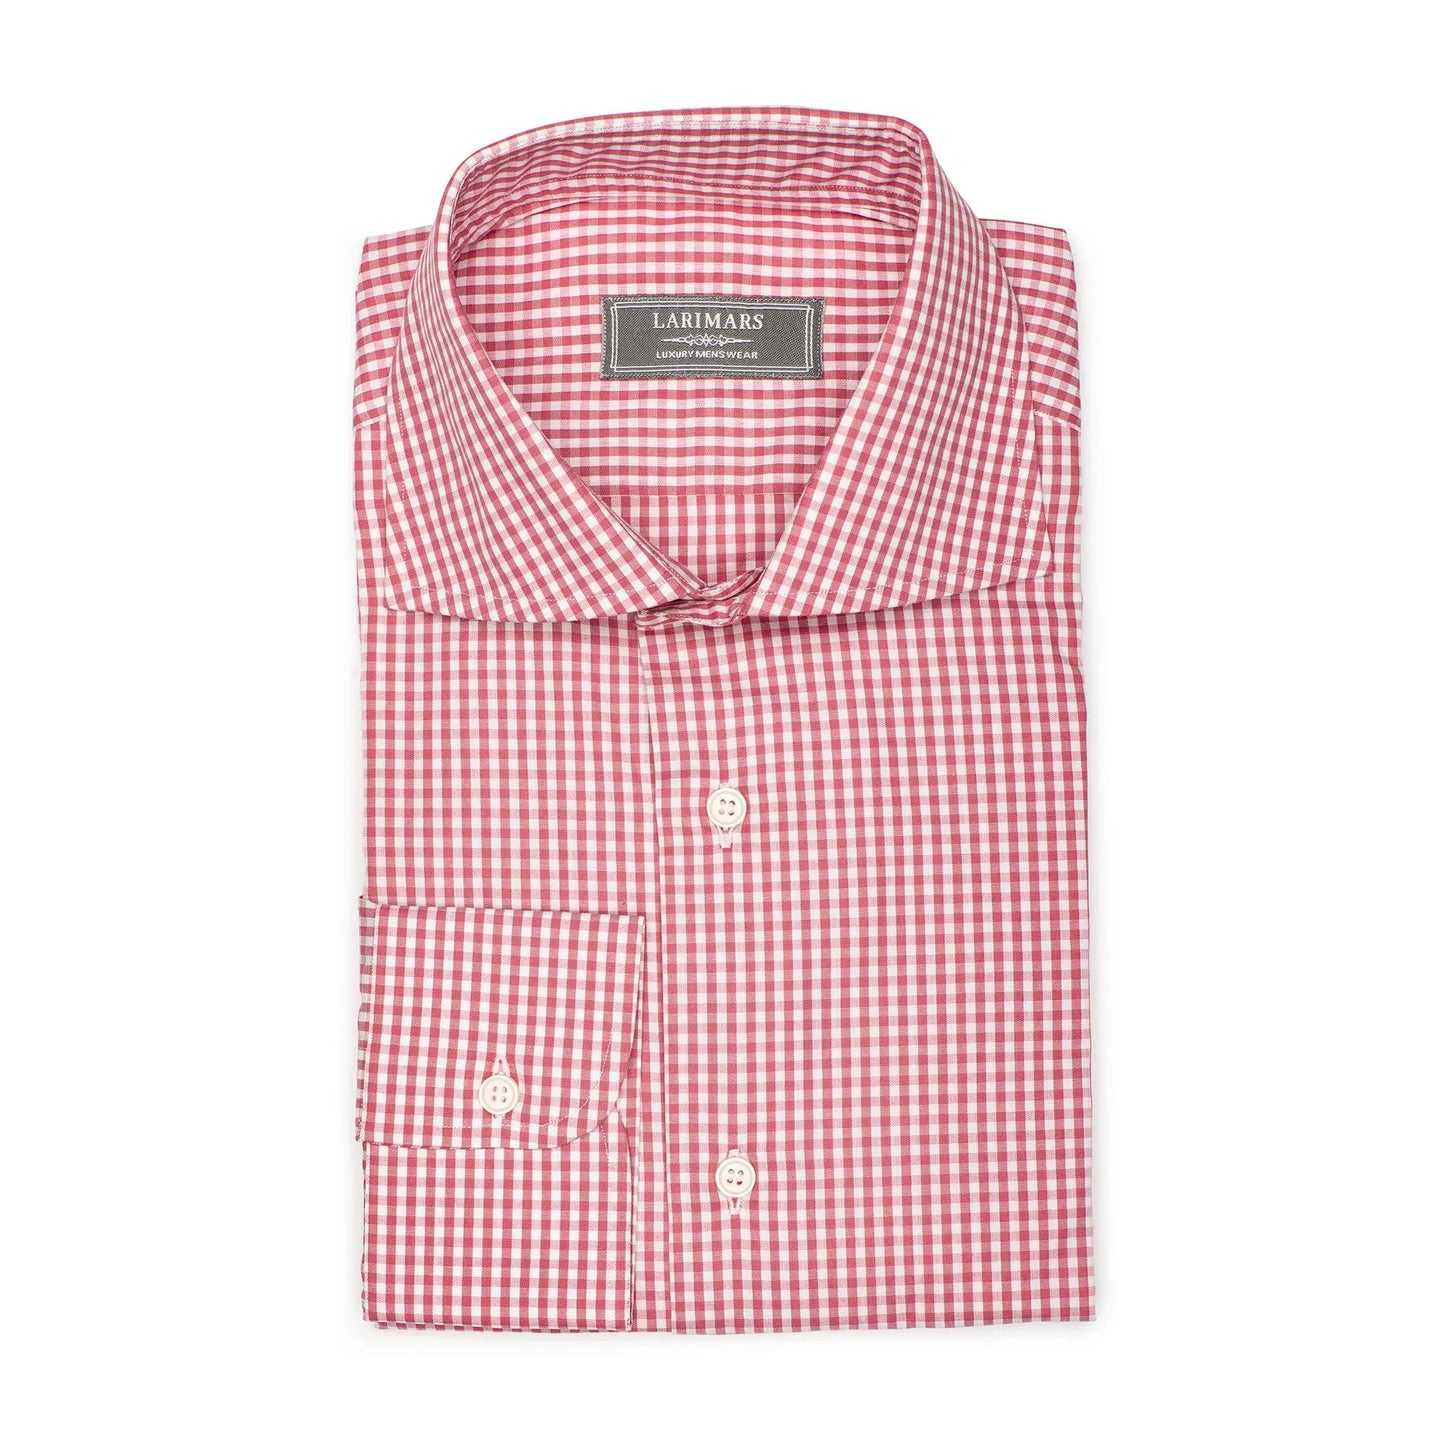 Red Small Check - Larimars Clothing Men's Formal and casual wear shirts